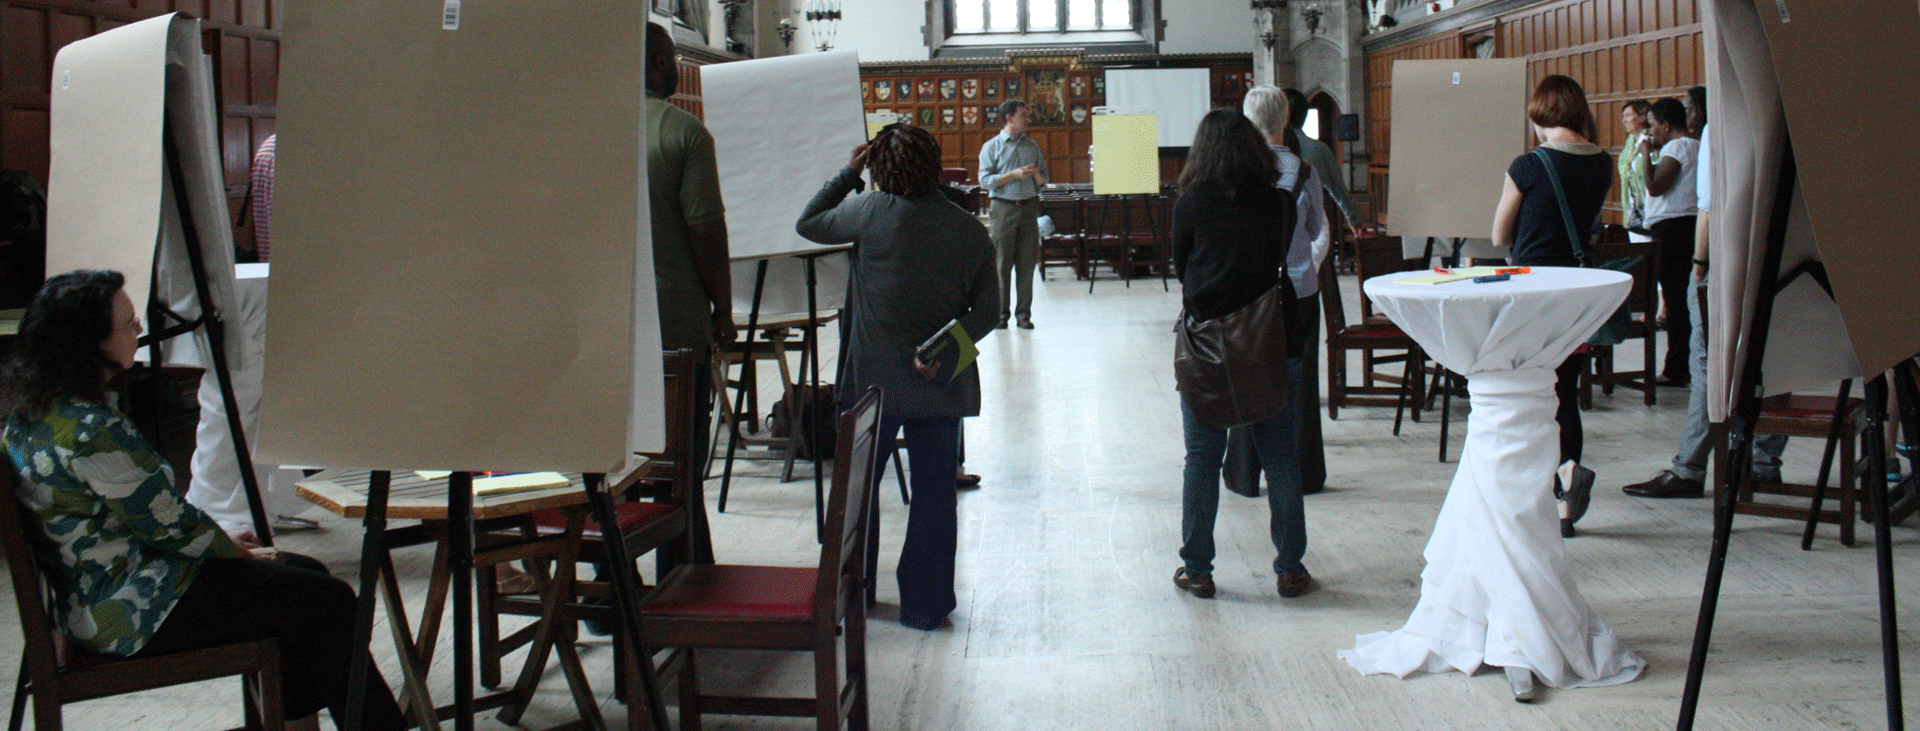 Group of faculty attending seminar in Hart House Great Hall